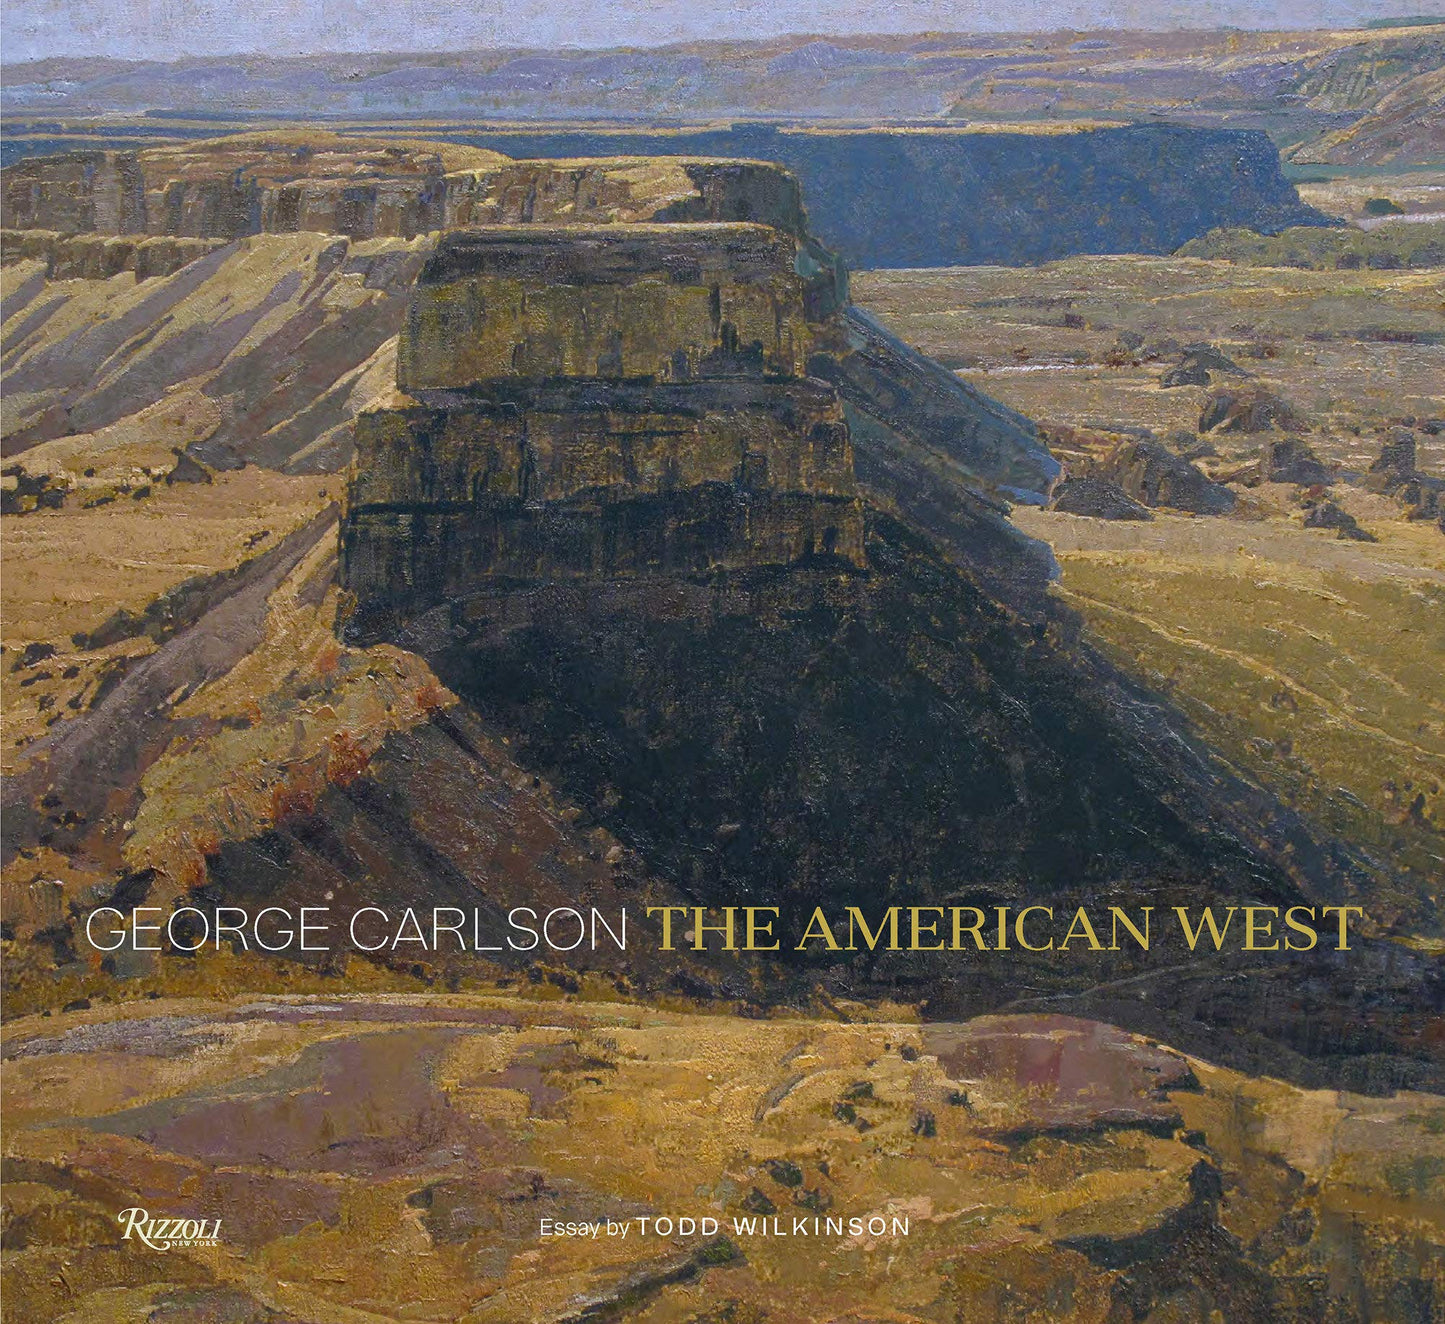 The American West: George Carlson